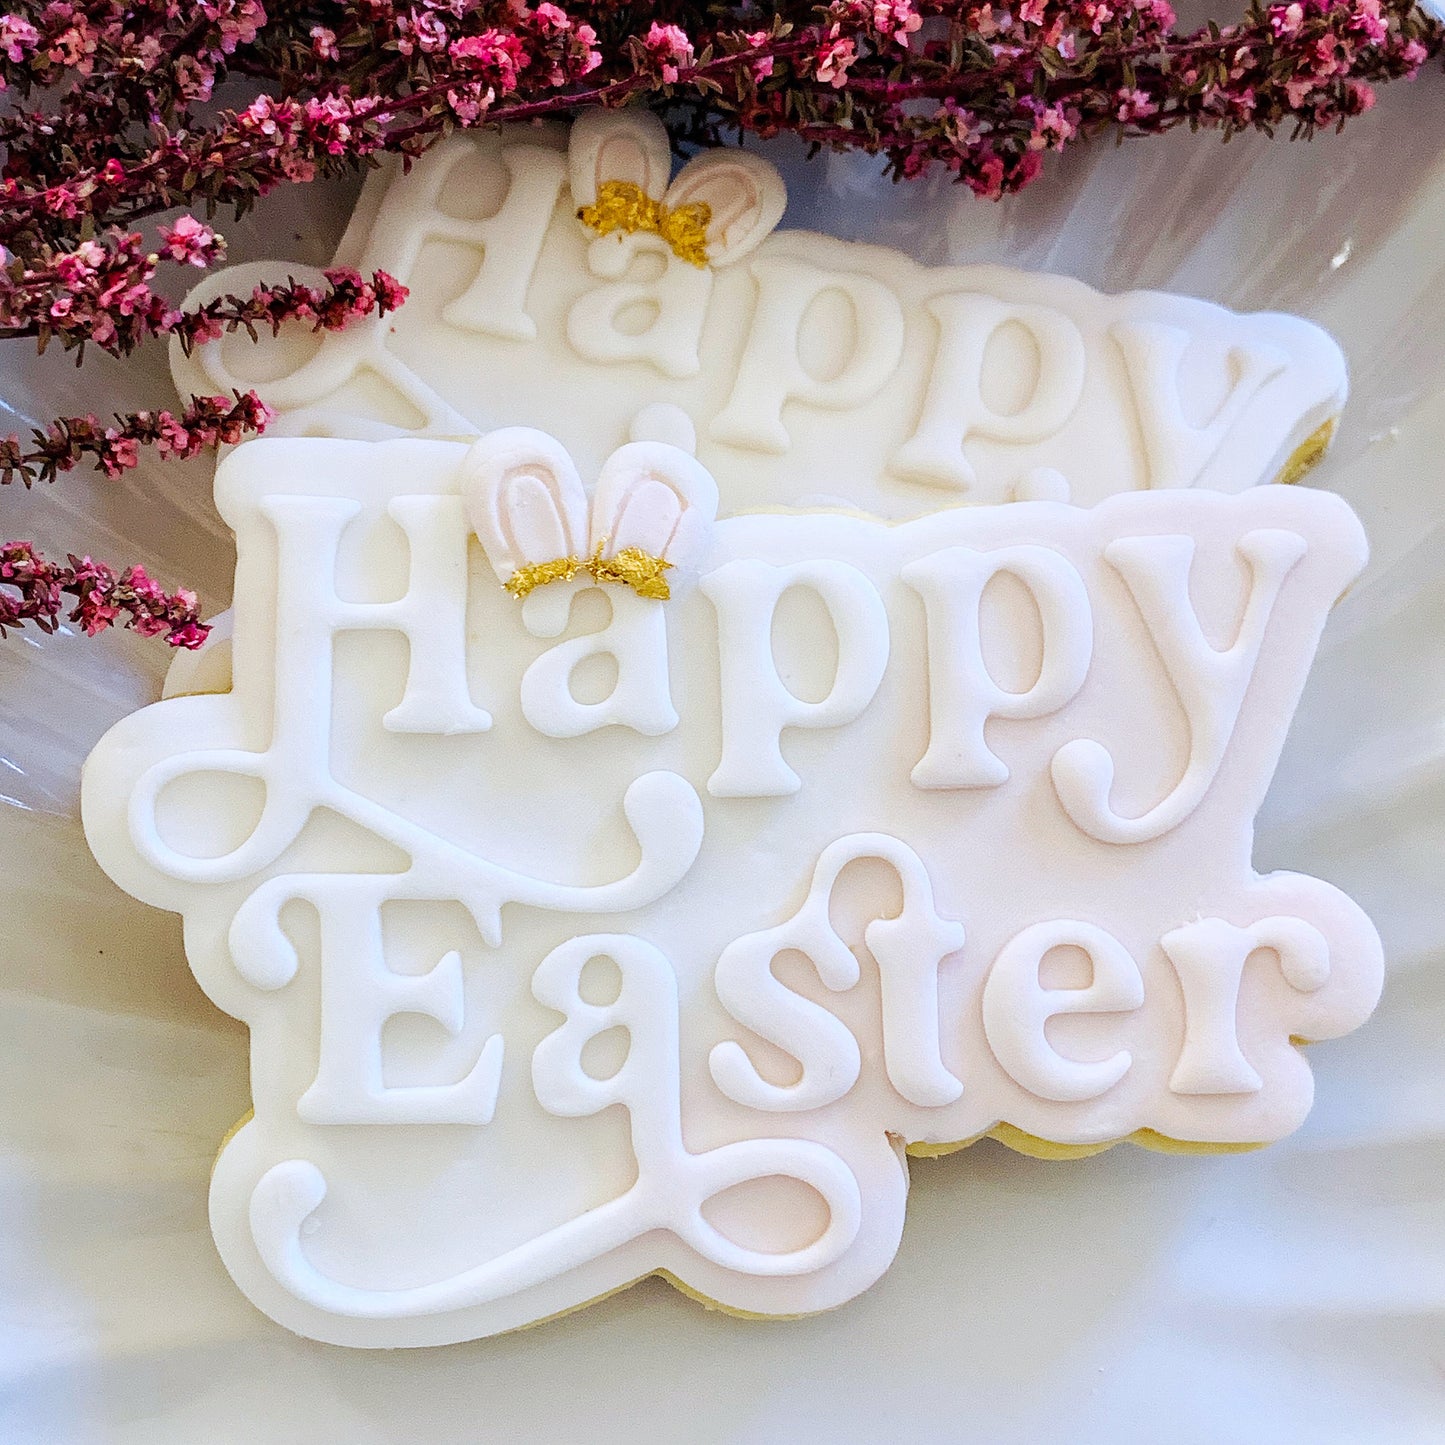 Happy Easter Cookie Stamp and Cutter